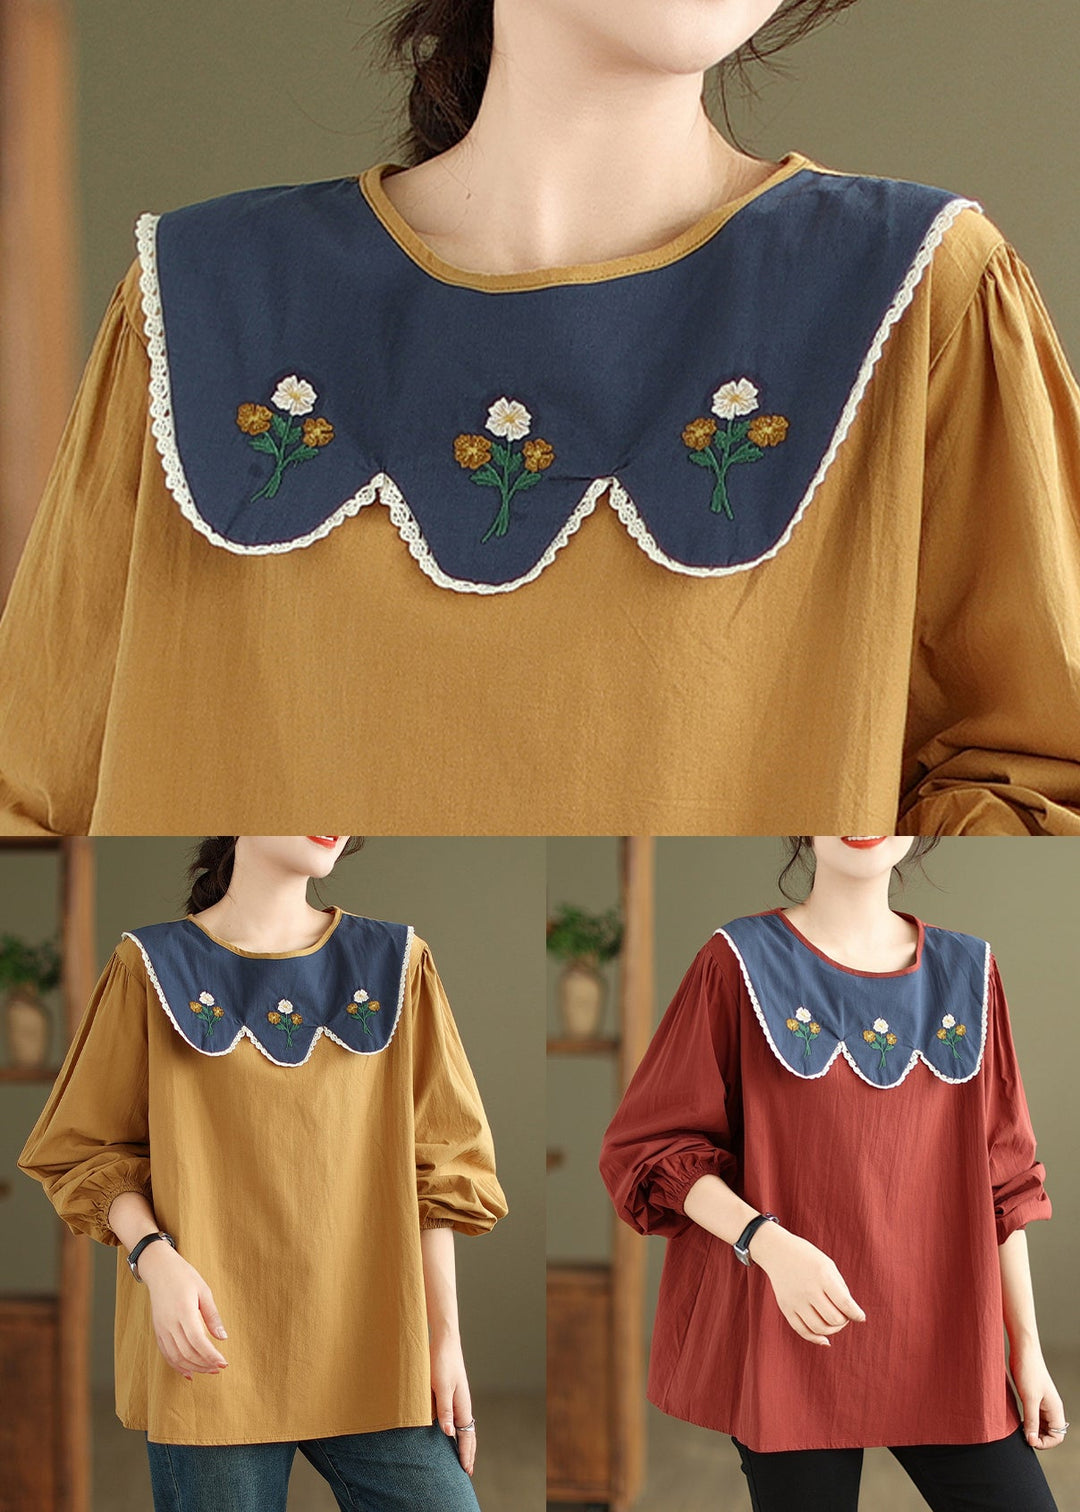 Women Rust Embroideried Patchwork Cotton Top Fall